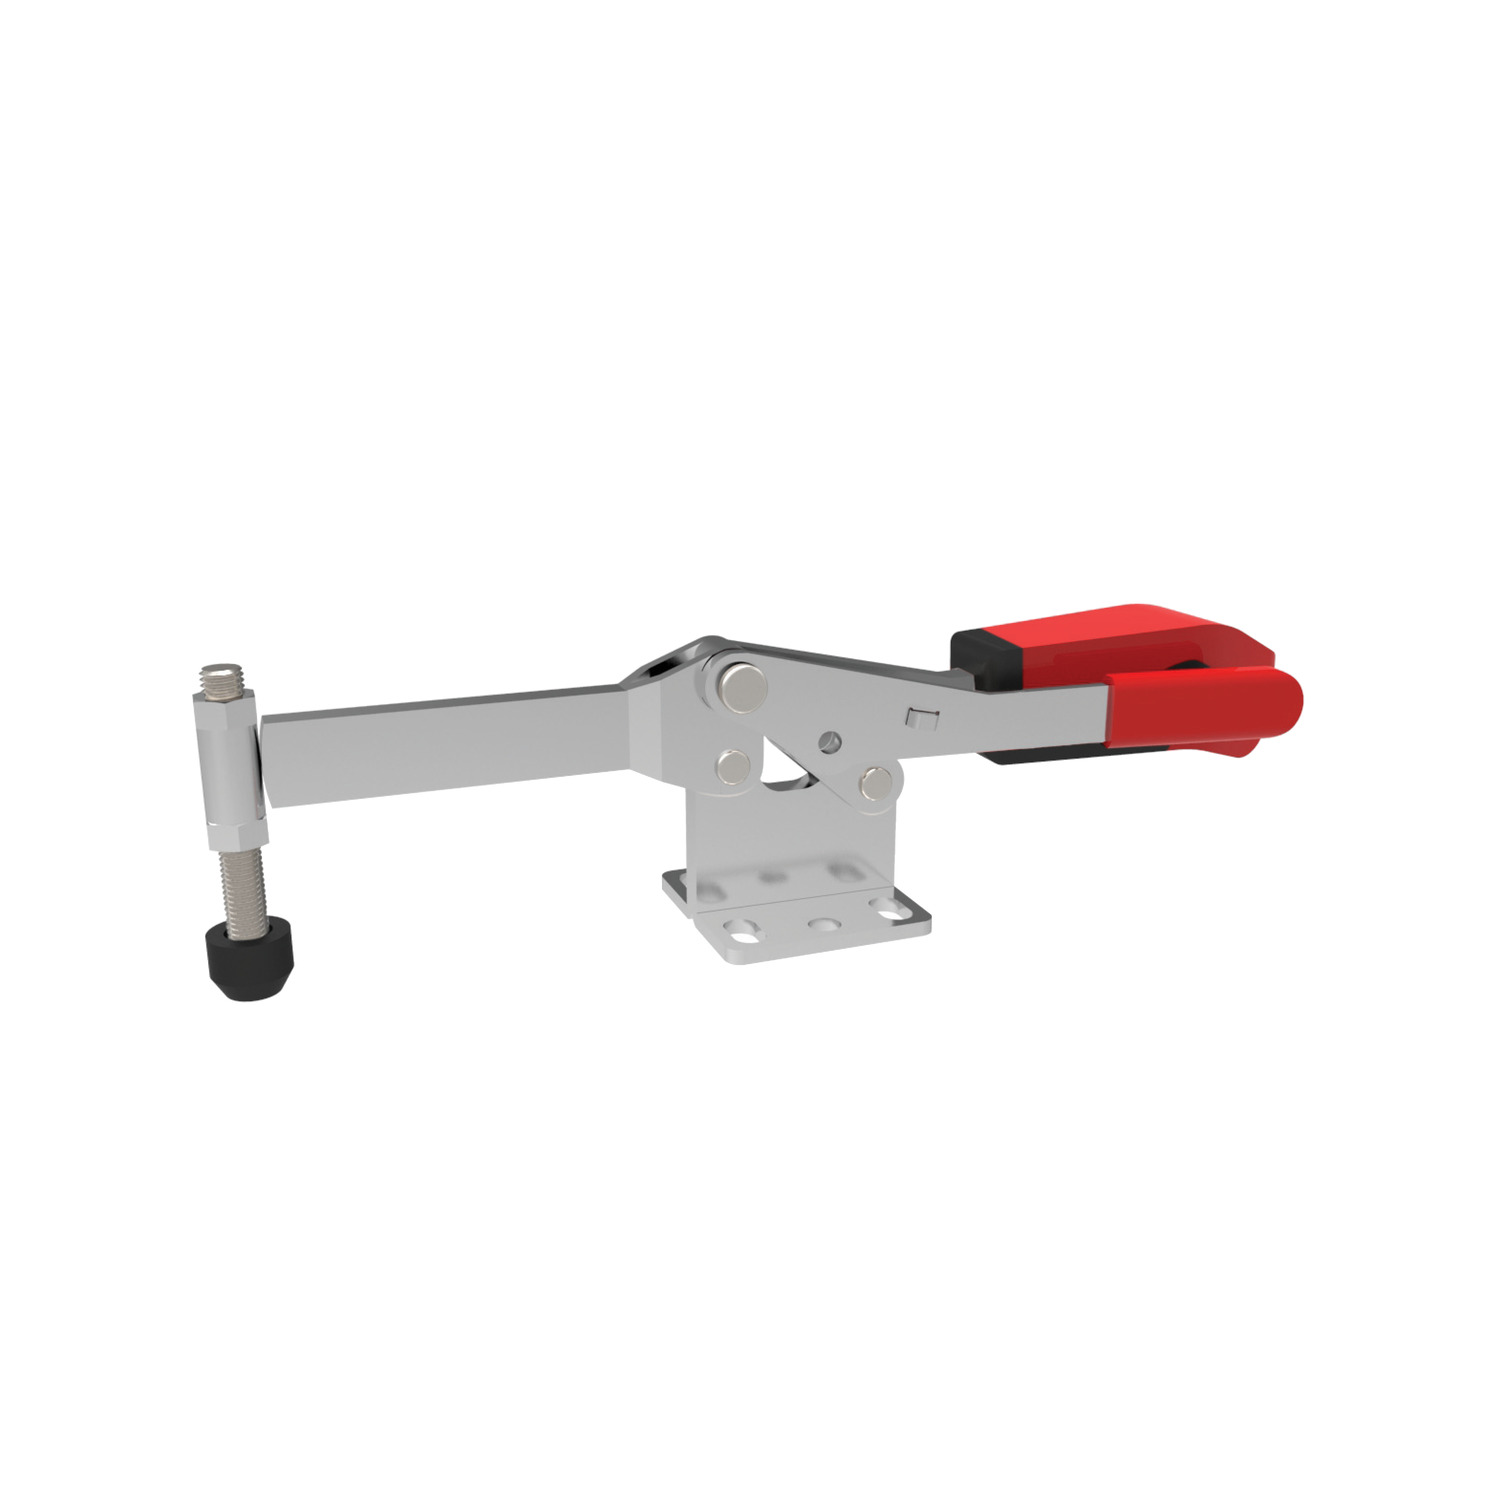 41040 Horizontal Acting Toggle Clamps